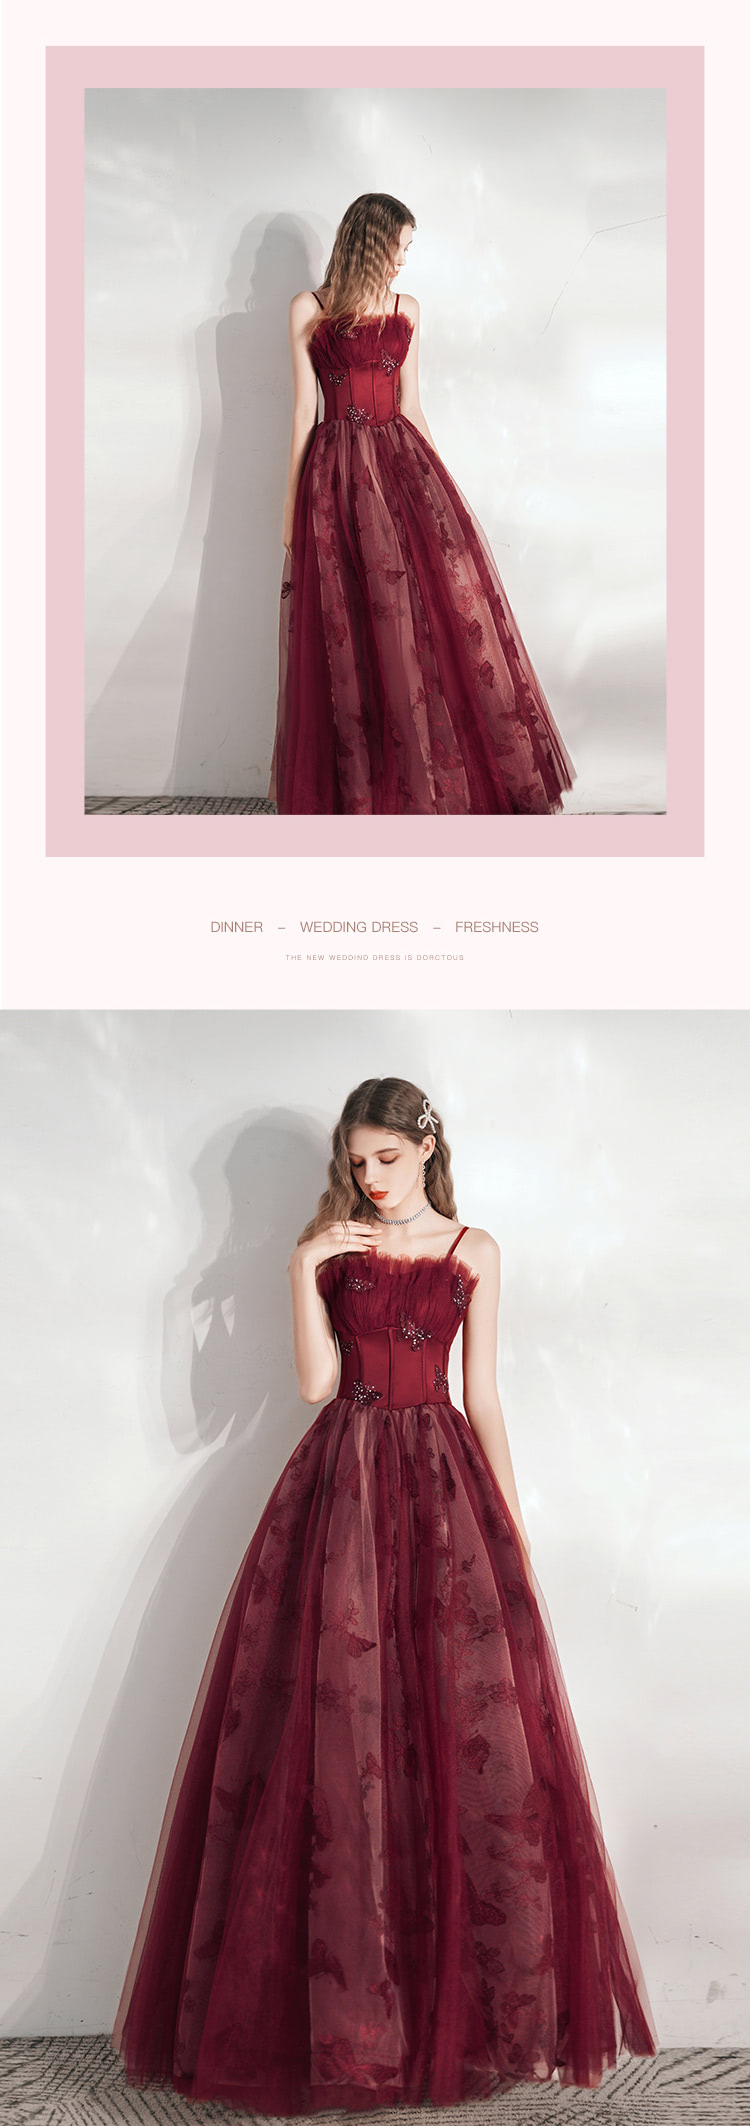 Unique-Wine-Red-Maxi-Prom-Dress-Formal-Party-Evening-Gown13.jpg